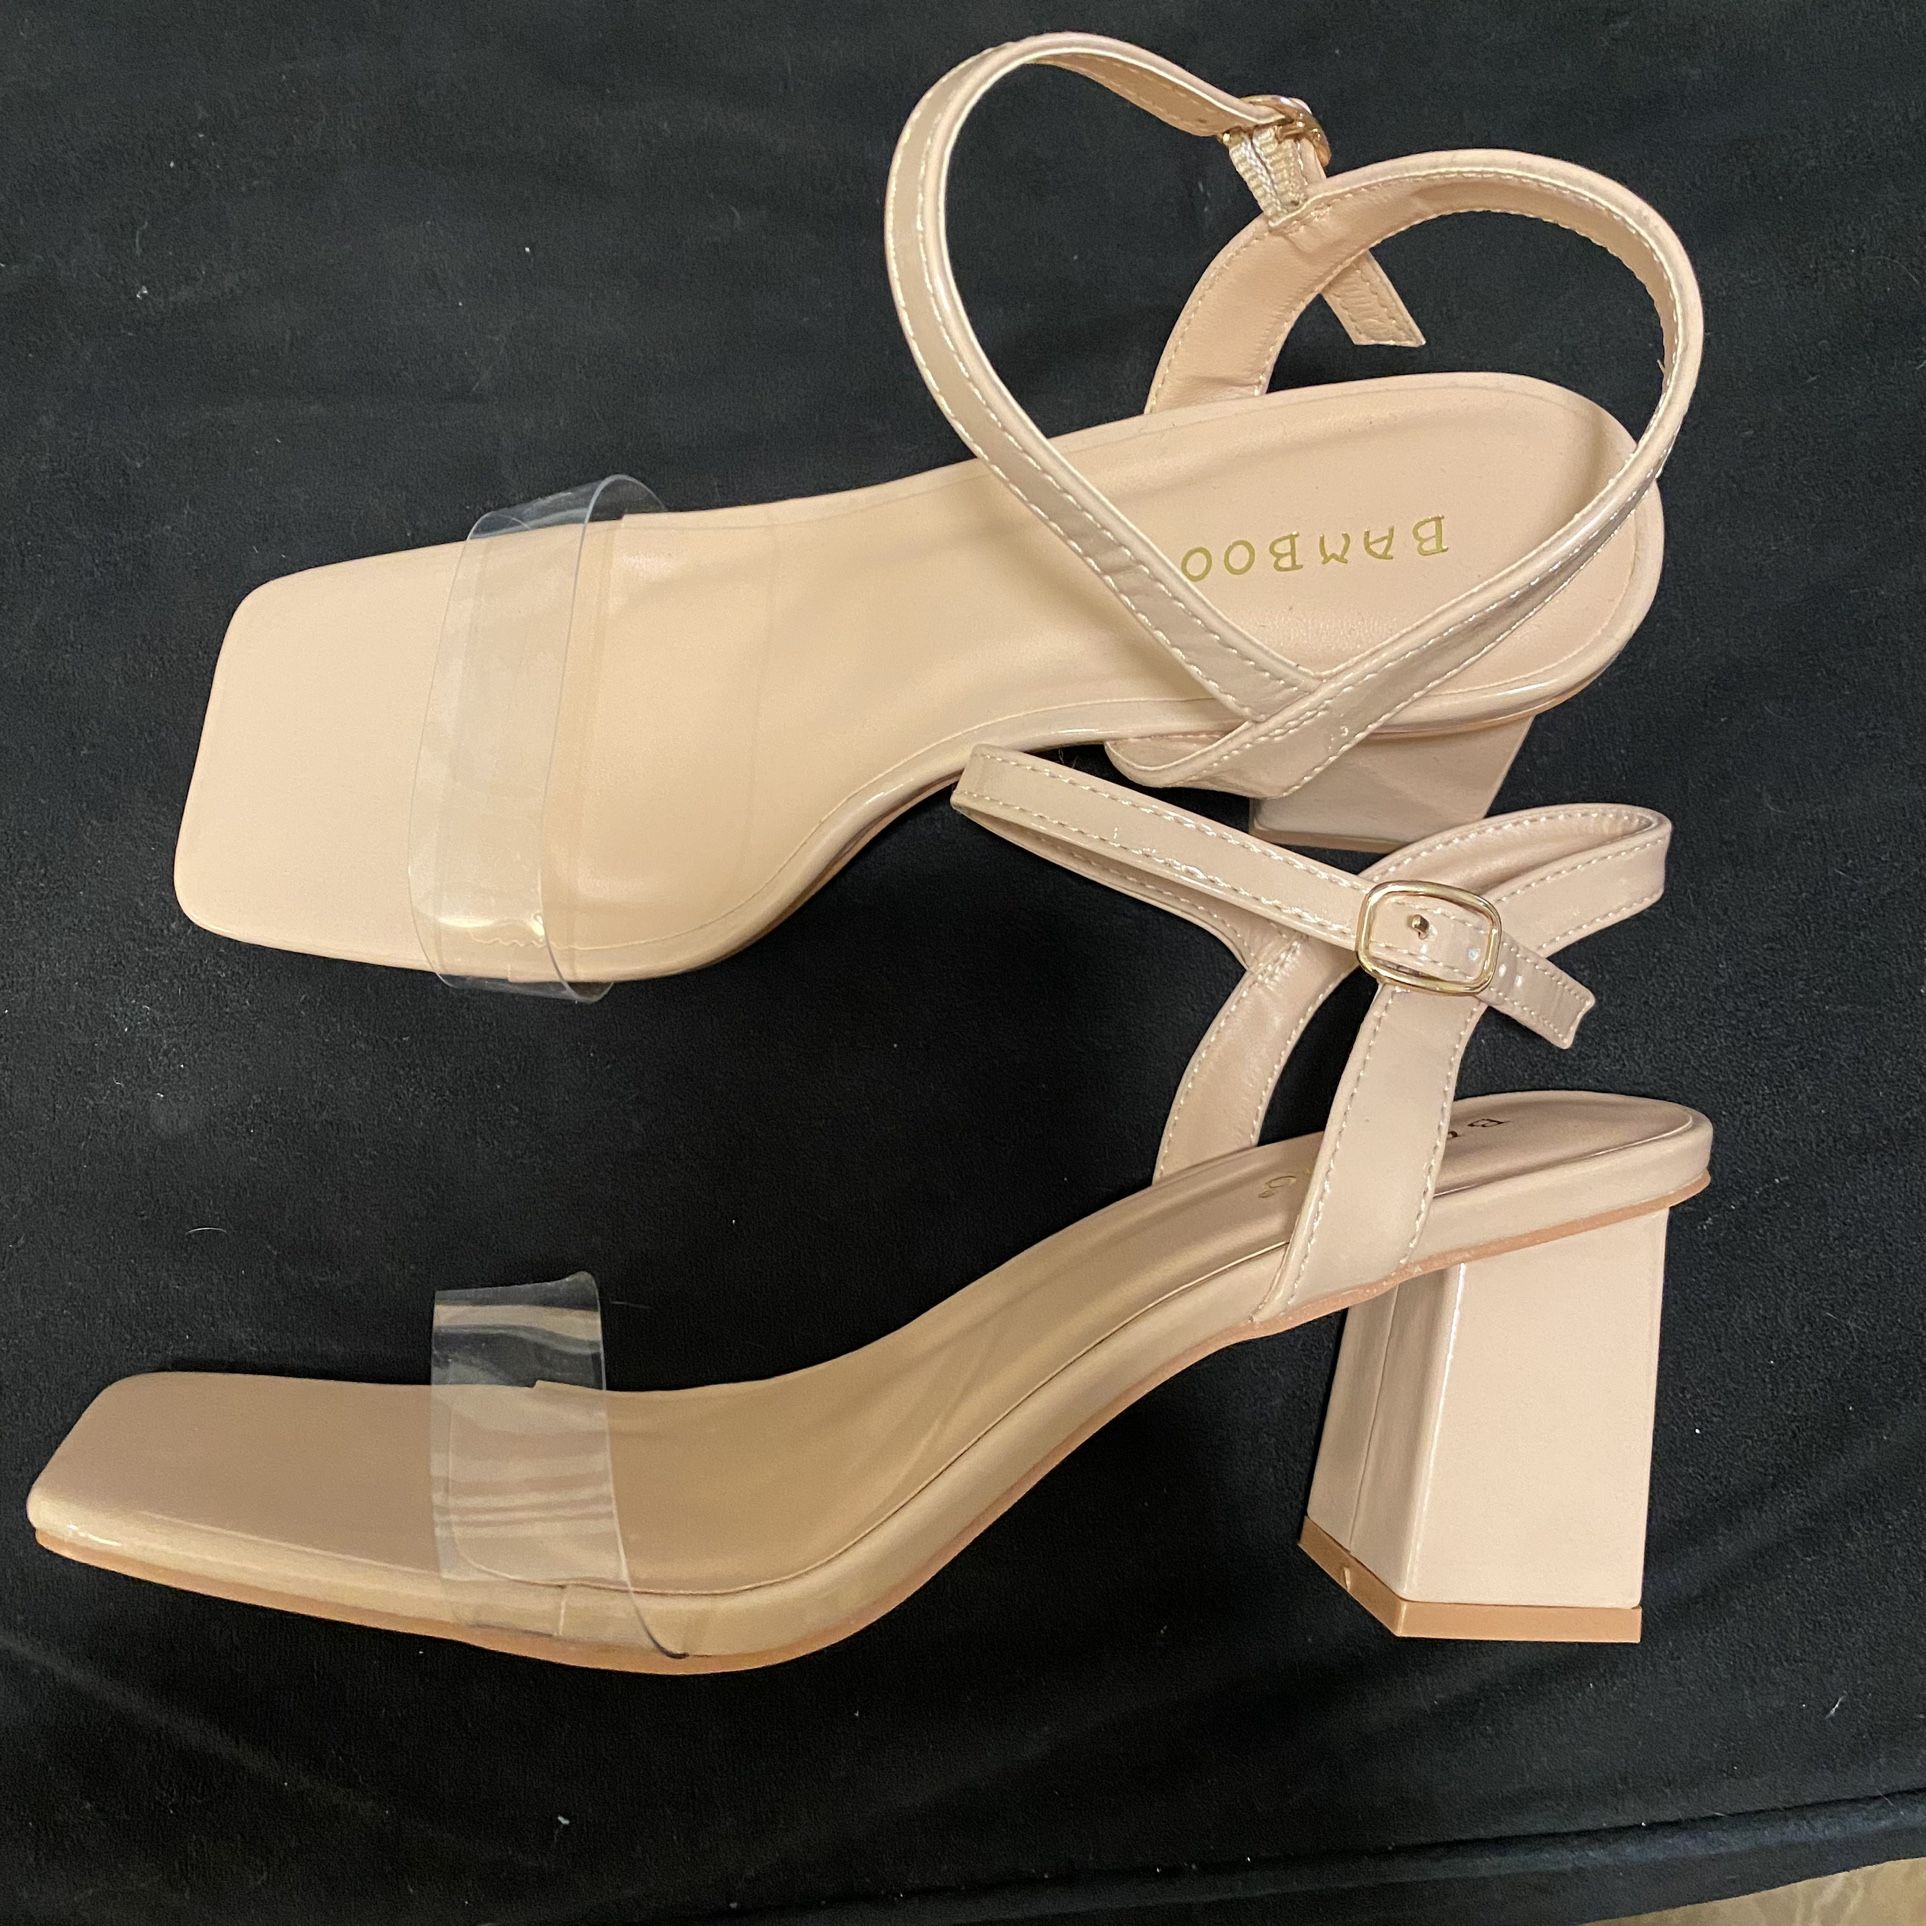 Square toe clear strap heels